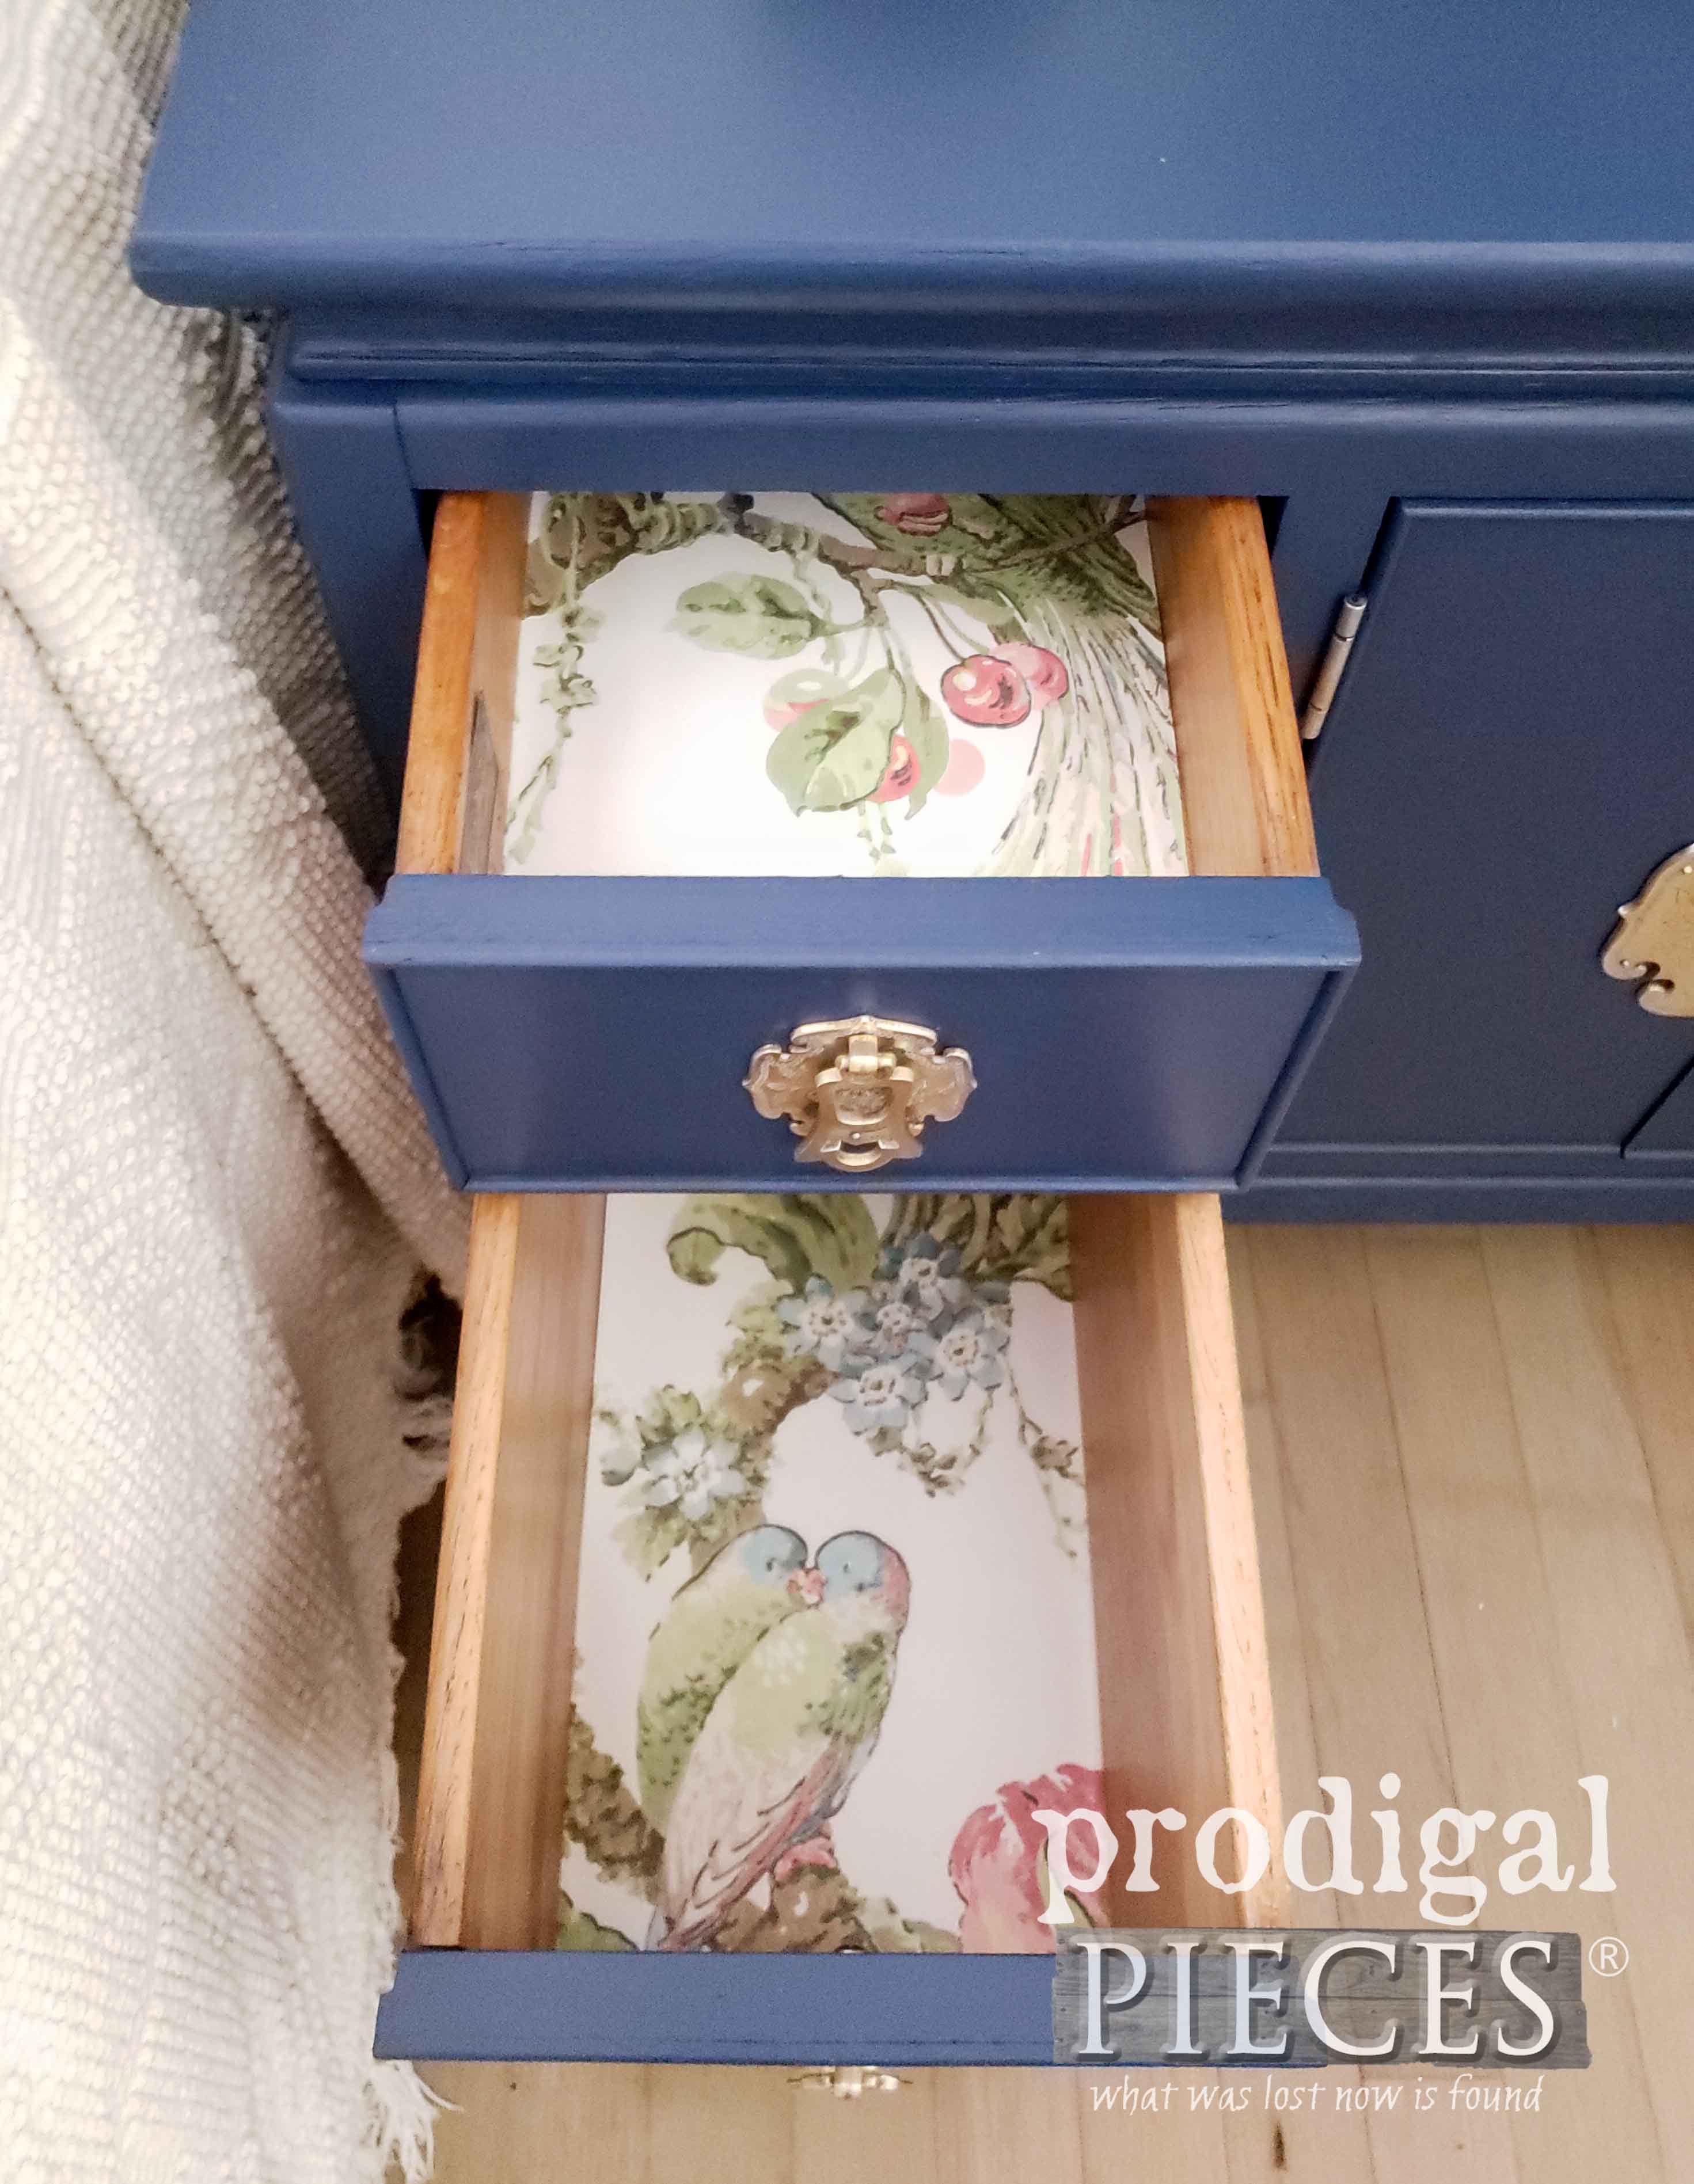 Vintage Chest Nightstand Drawers Lined with Vintage Wallpaper Samples by Larissa of Prodigal Pieces | prodigalpieces.com